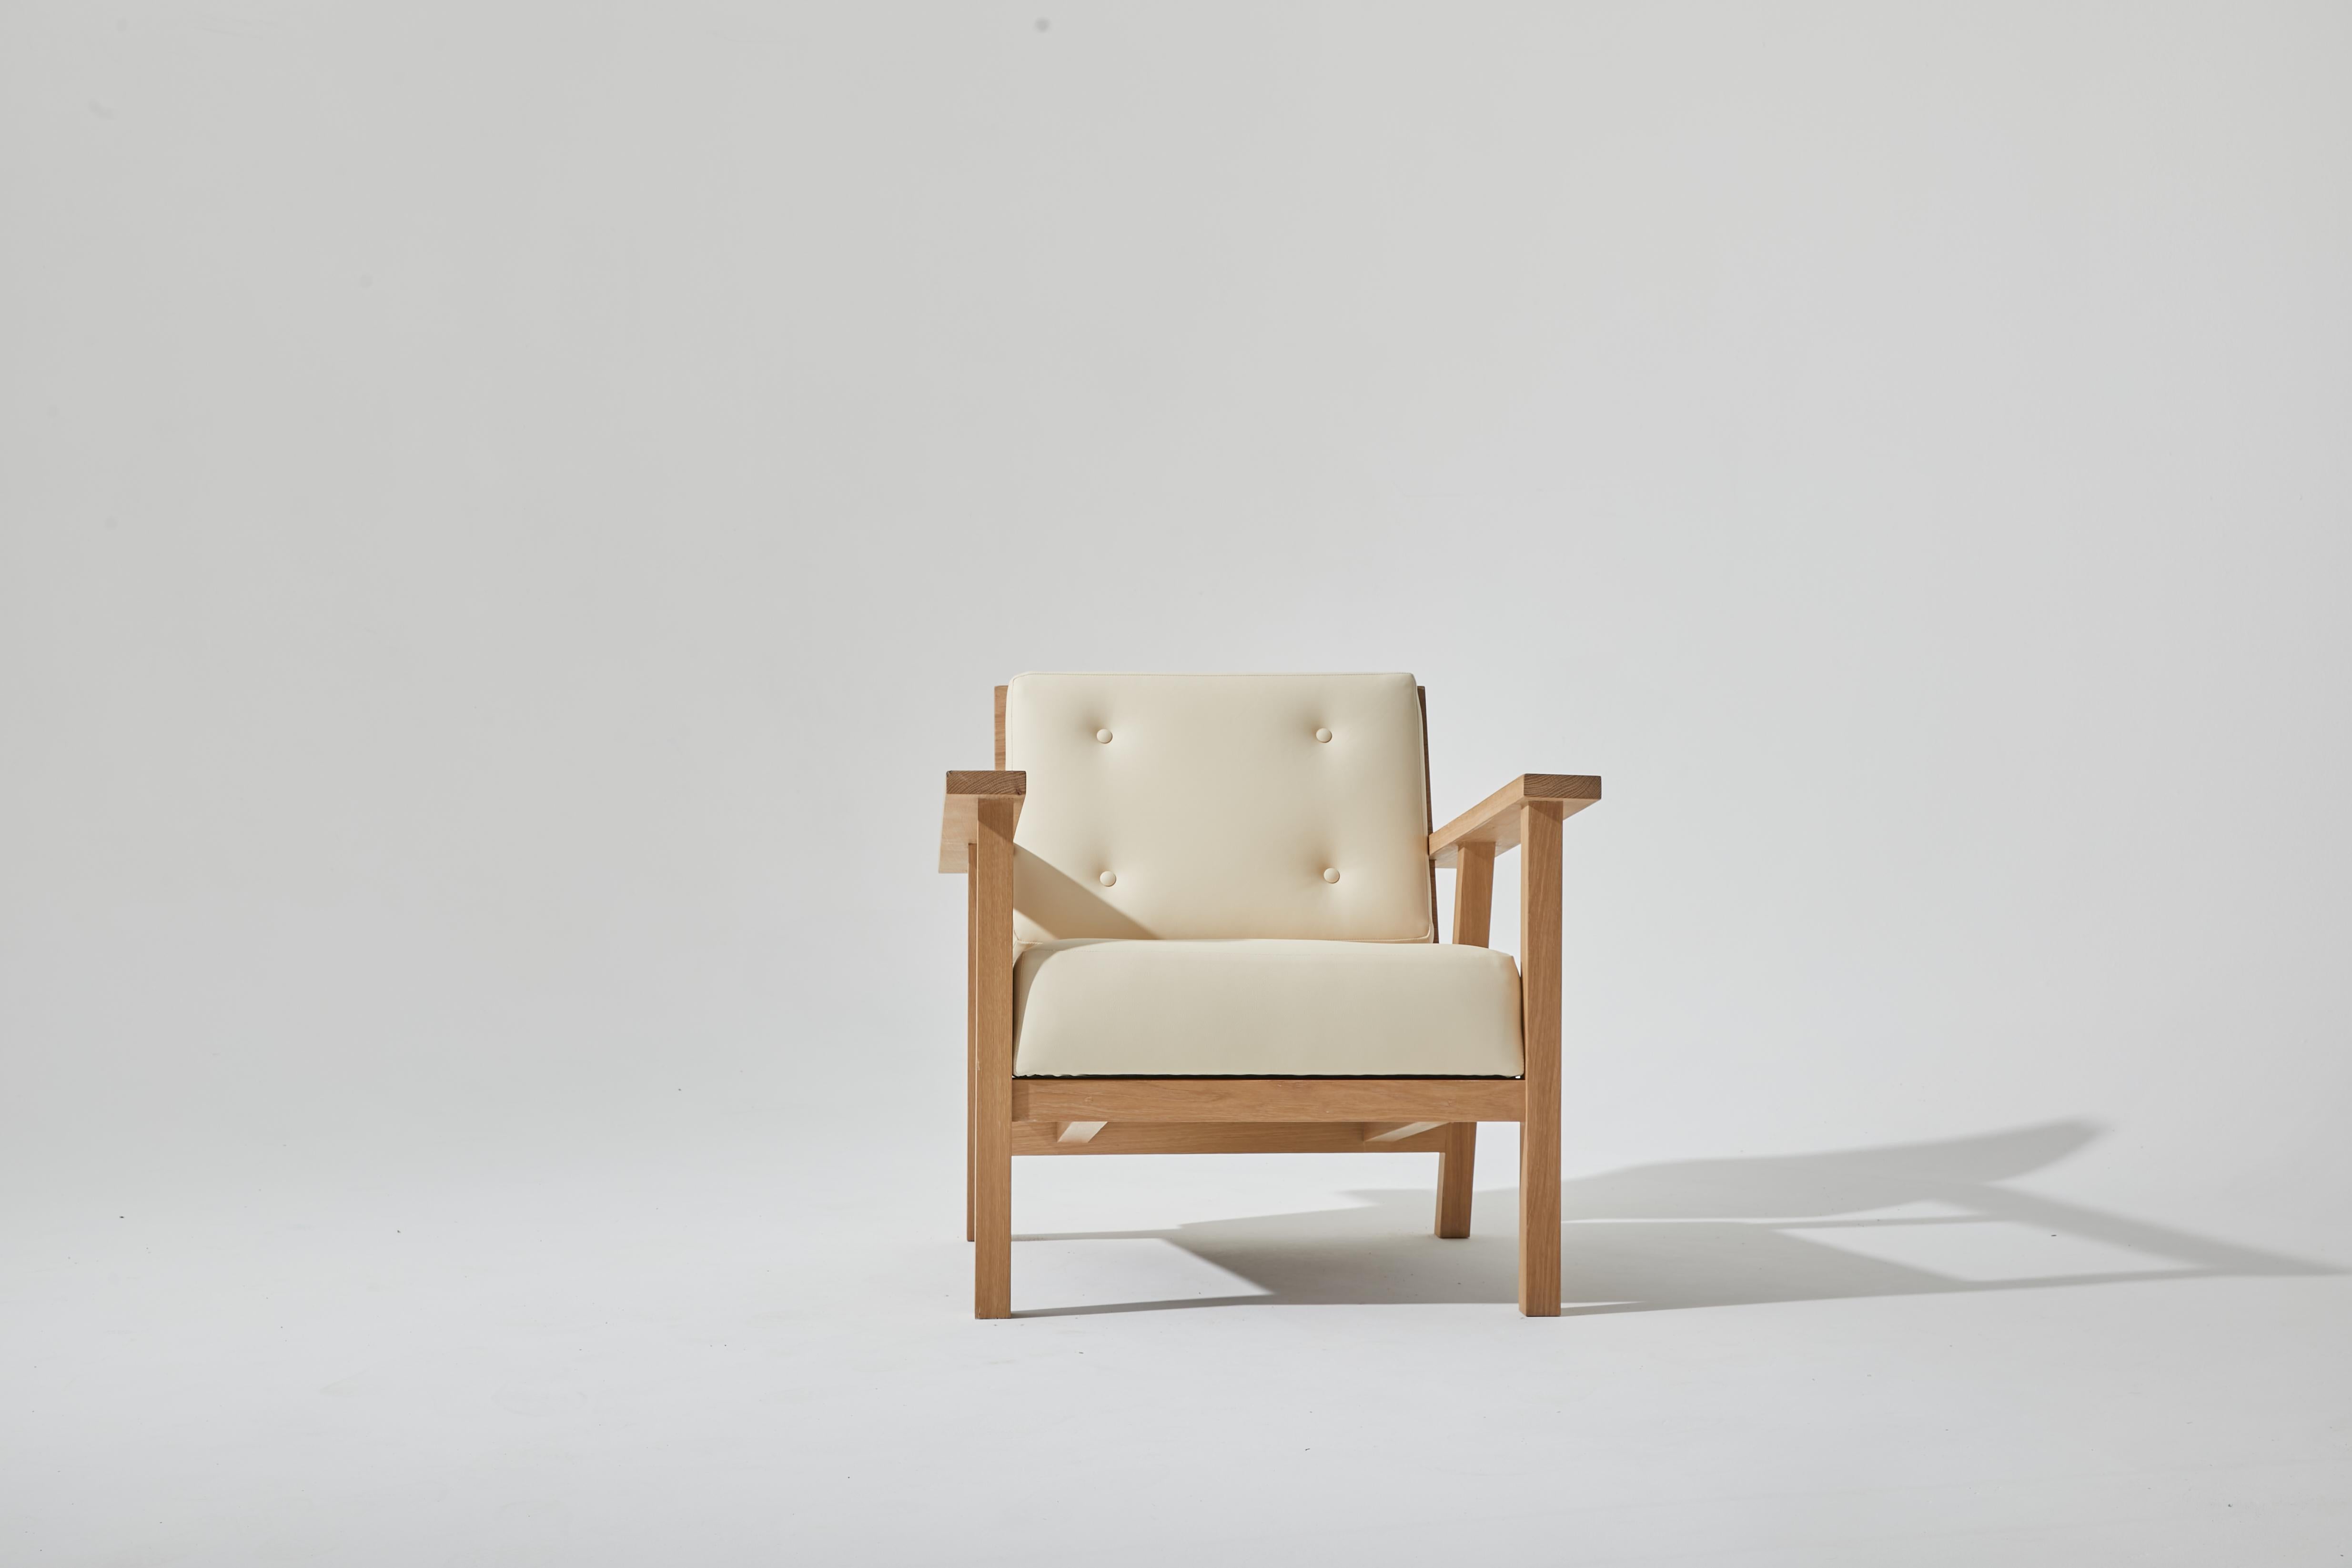 The SH01 Chair was designed at just the right angle for lounging or working. I went through many prototypes and styles to find the fit that felt just right with the best support and comfort. It is made using traditional mortise and tenon joinery